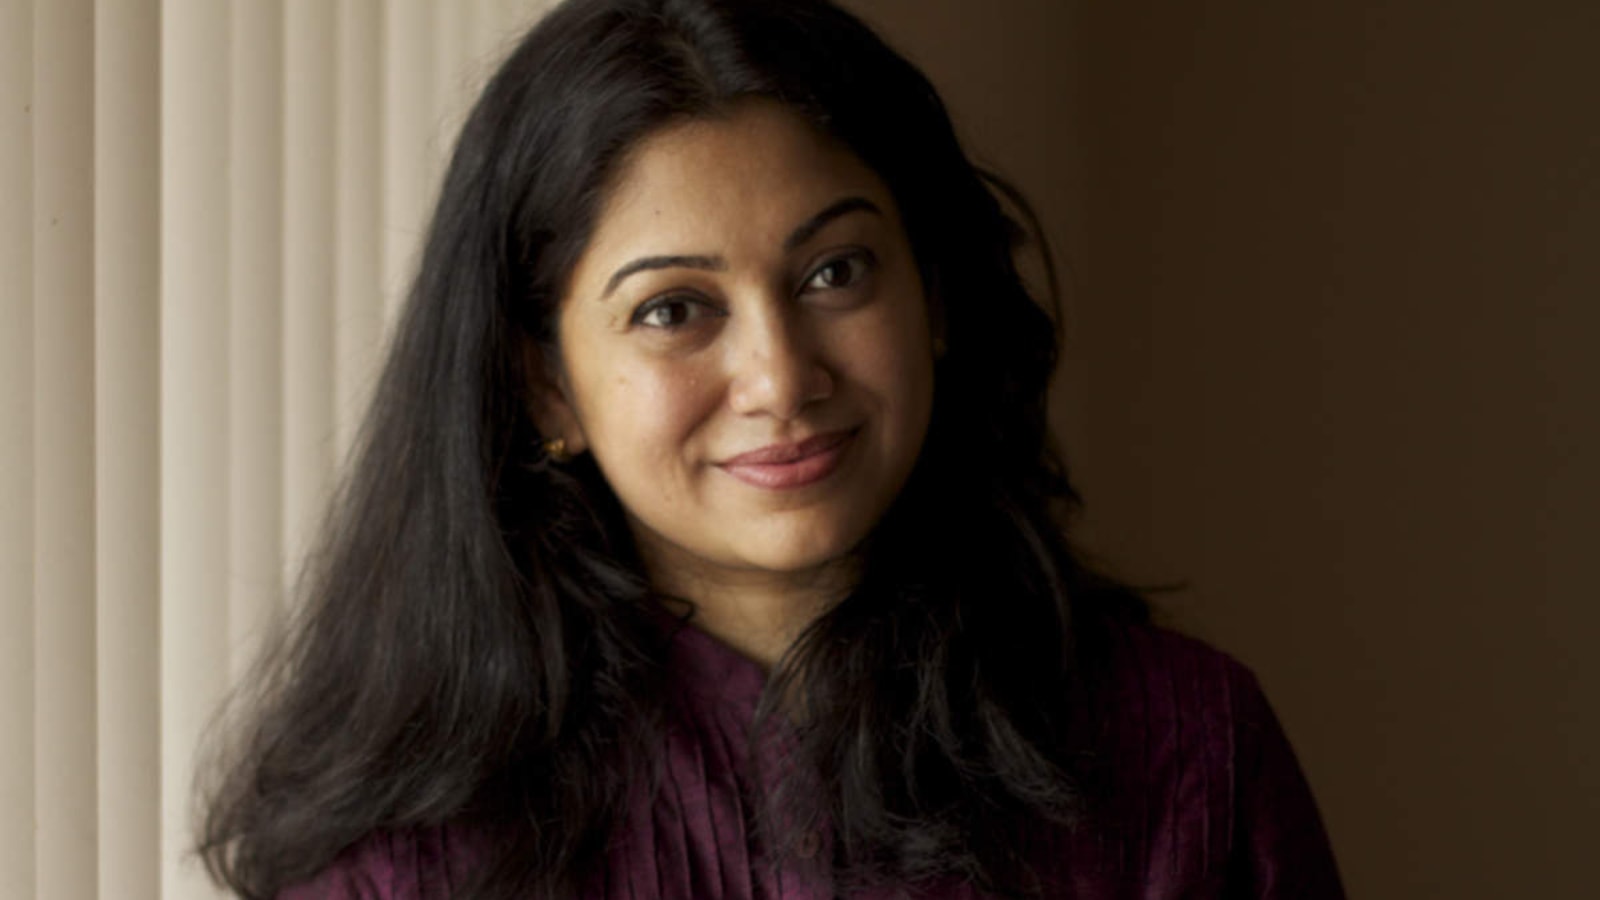 Anjali Menon Says Filmmaking Knowledge Is Must For Giving Film Reviews Hindustan Times